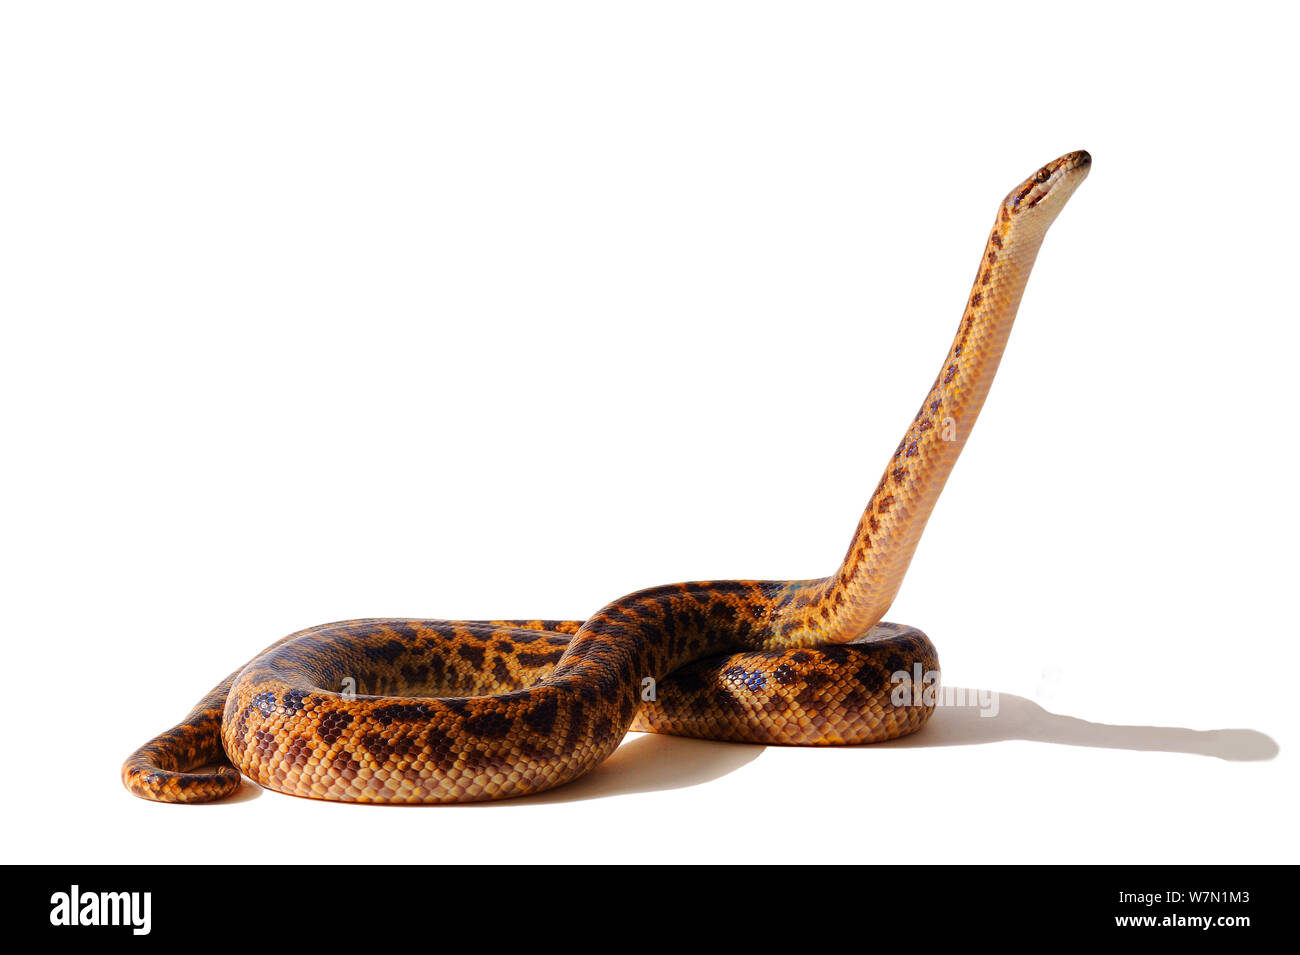 Eastern small-blotched / Spotted Python (Antaresia maculosa) studio shot on white background. Endemic to eastern Papua-New-Guinea and eastern Australia. Stock Photo